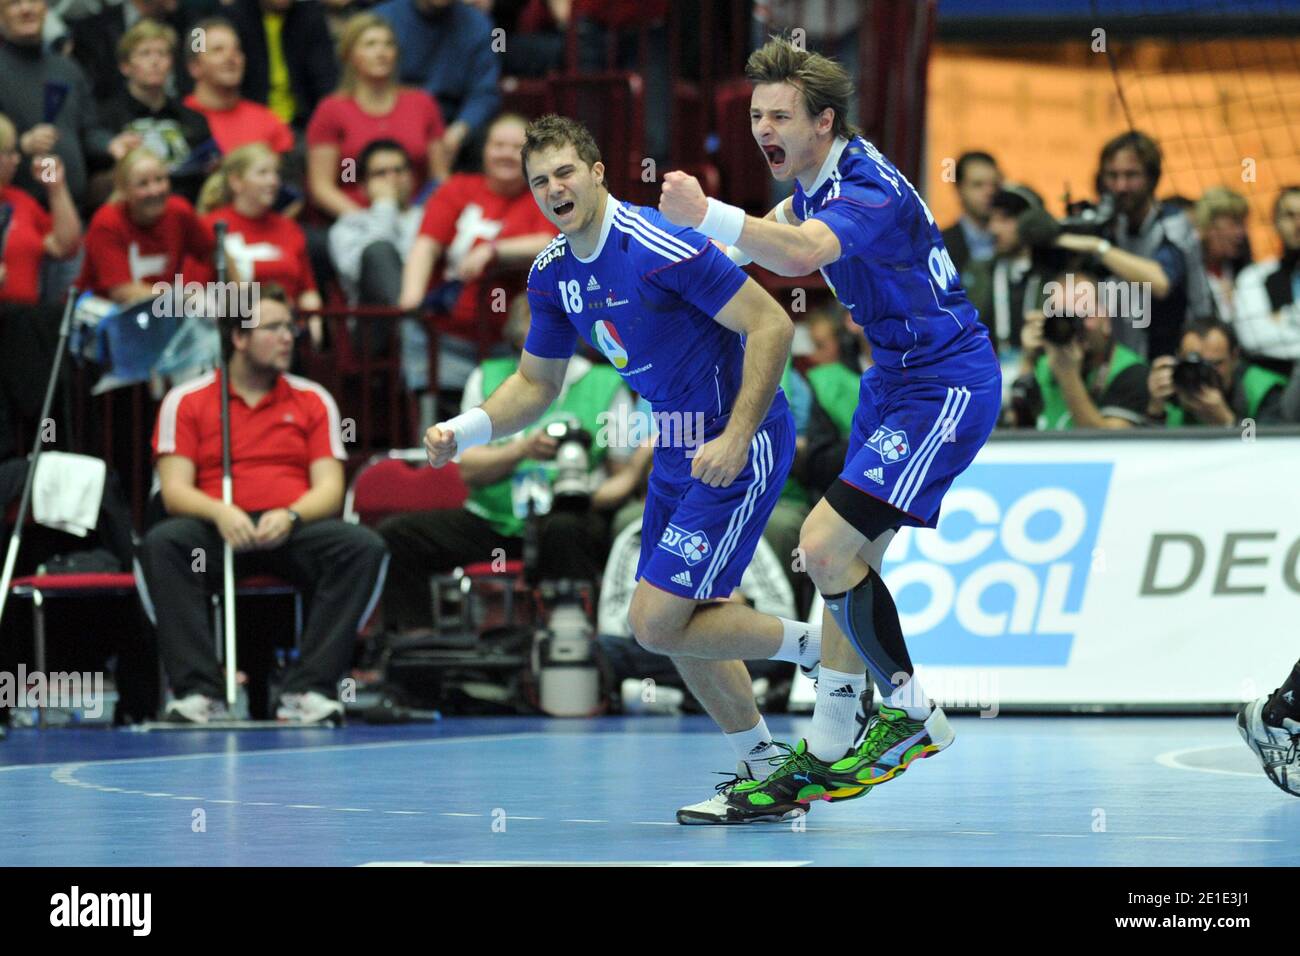 France's Xavier Barachet and William Accambray in action. France won the  Men's 2011 World Championship Handball final match, France vs Denmark at  Malmo Arena in Malmo, Sweden on January 30, 2011. France